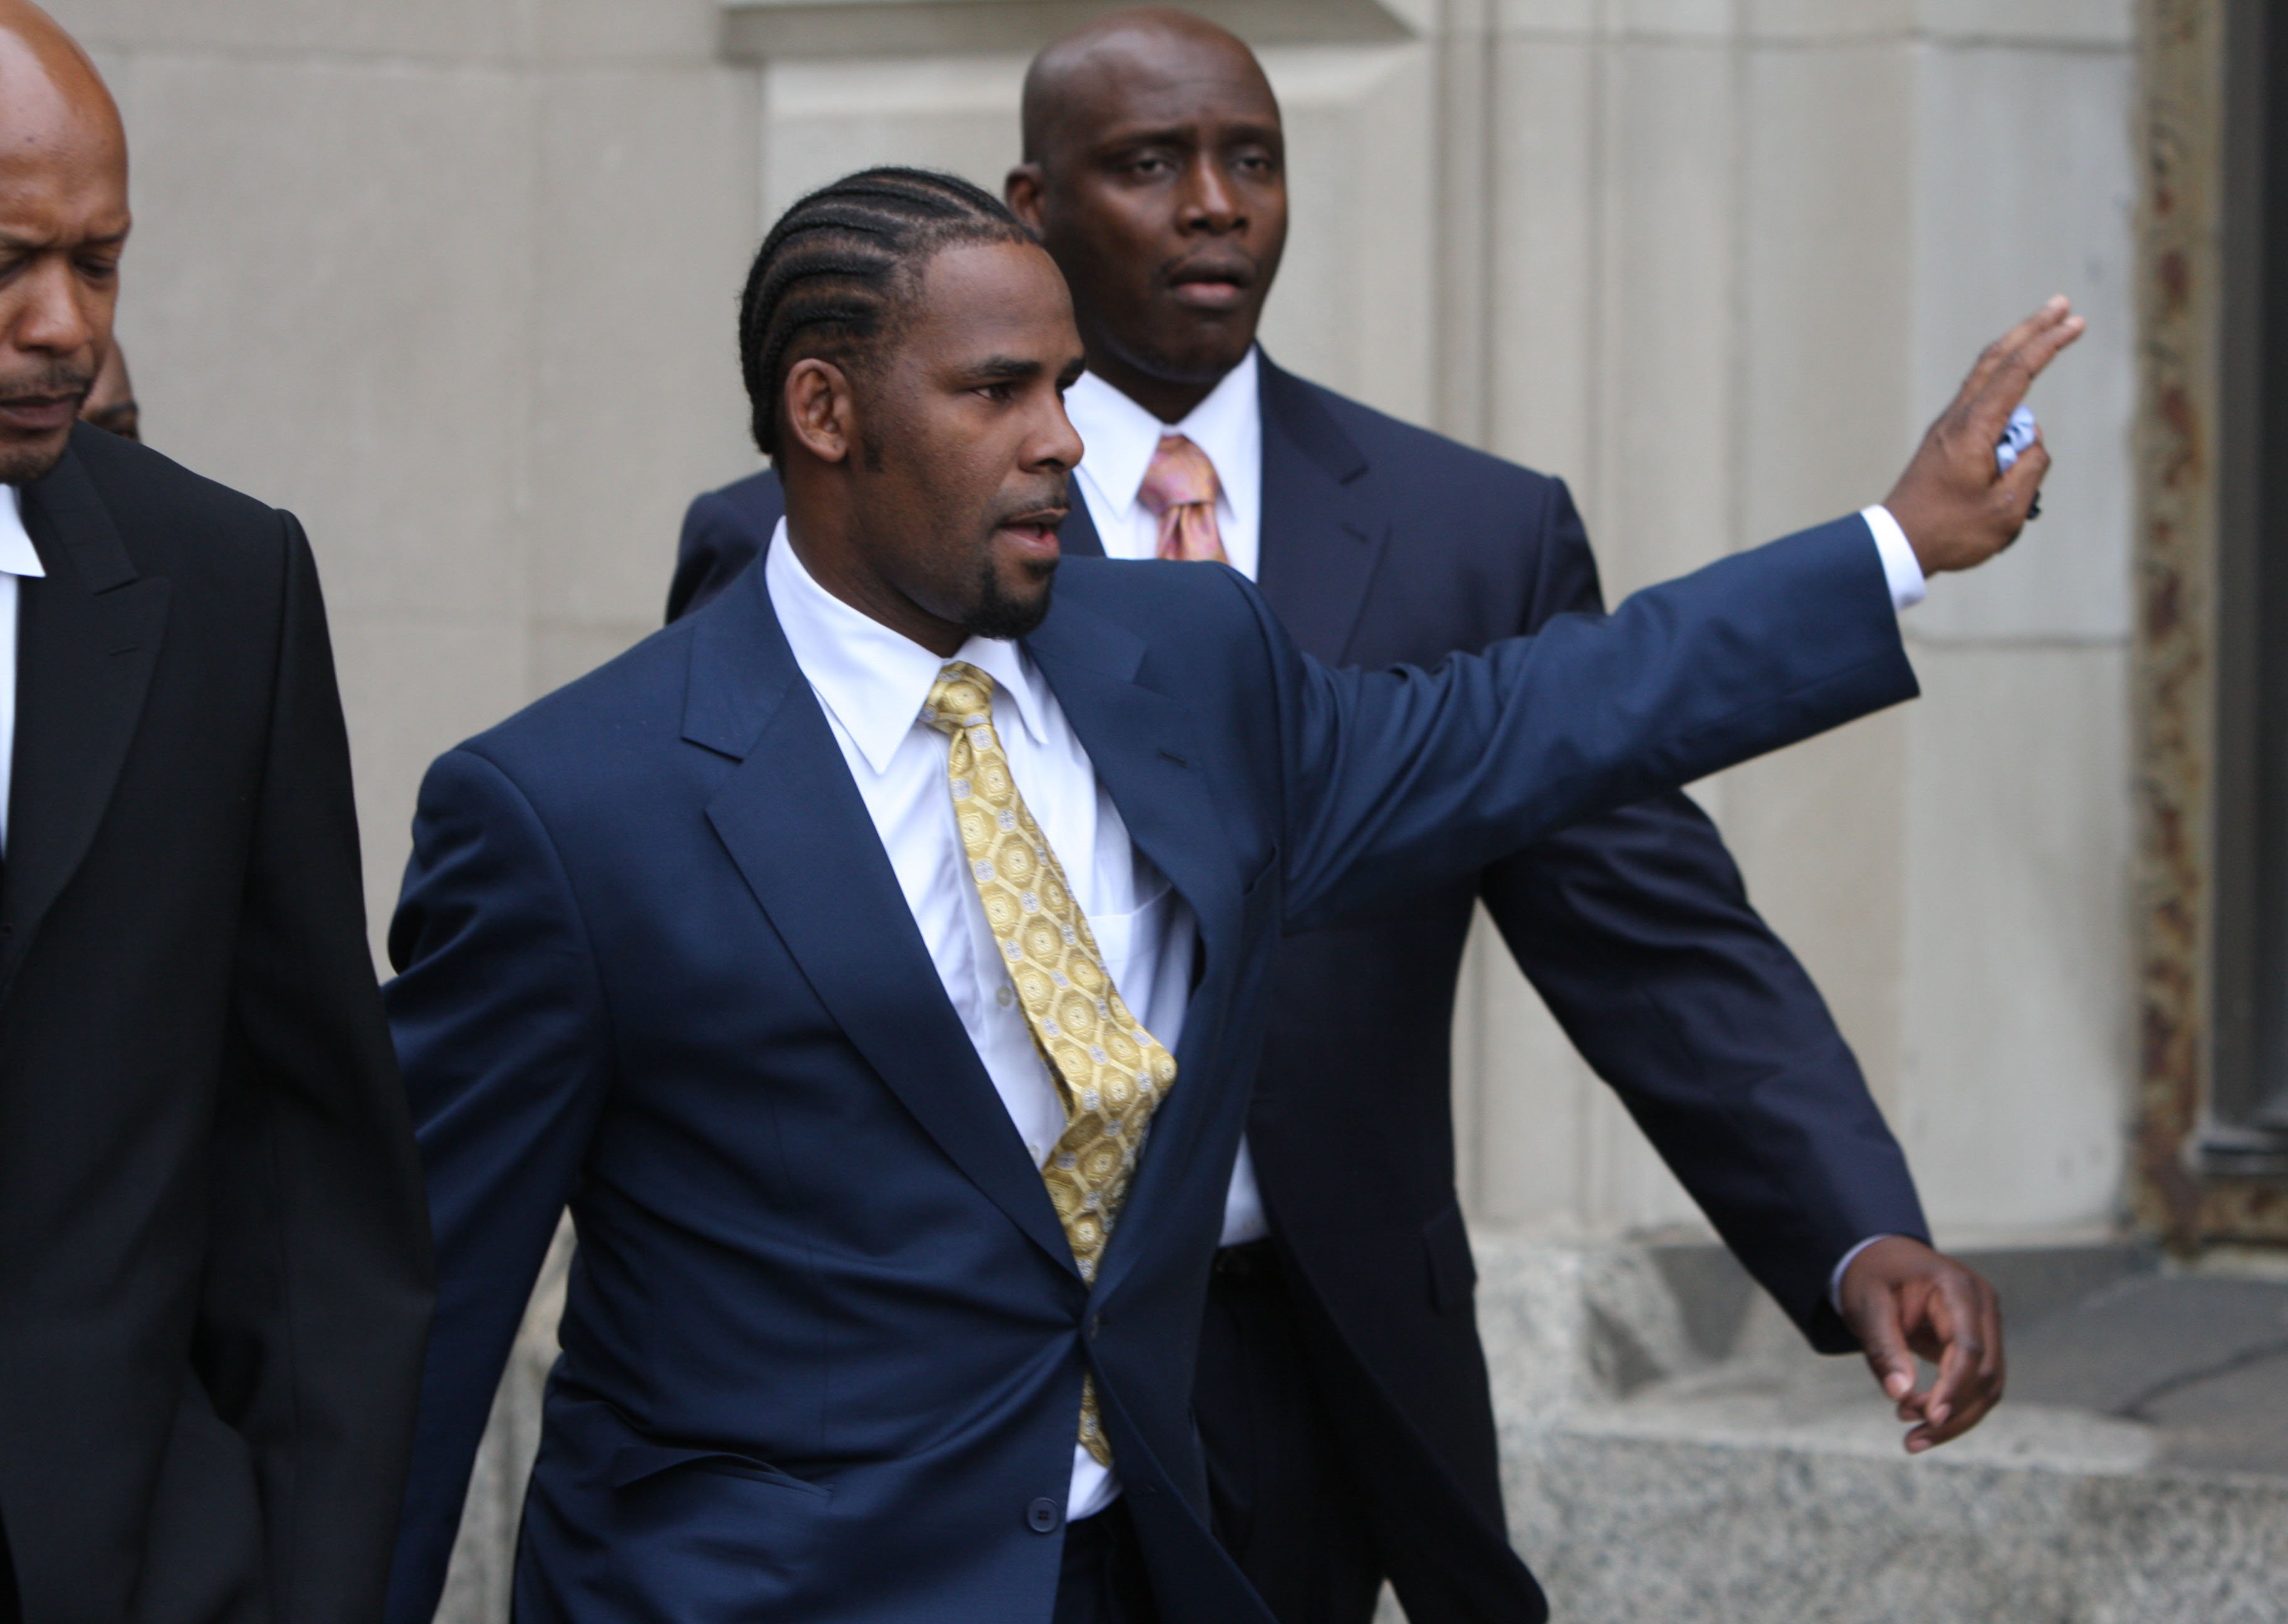 R&B star R. Kelly, 41, waves to supporters as he leaves the Cook County Criminal Courts Building after he was acquitted of child pornography charges Friday, June 13, 2008, in Chicago, Illinois. (Chicago Tribune—MCT via Getty Images)